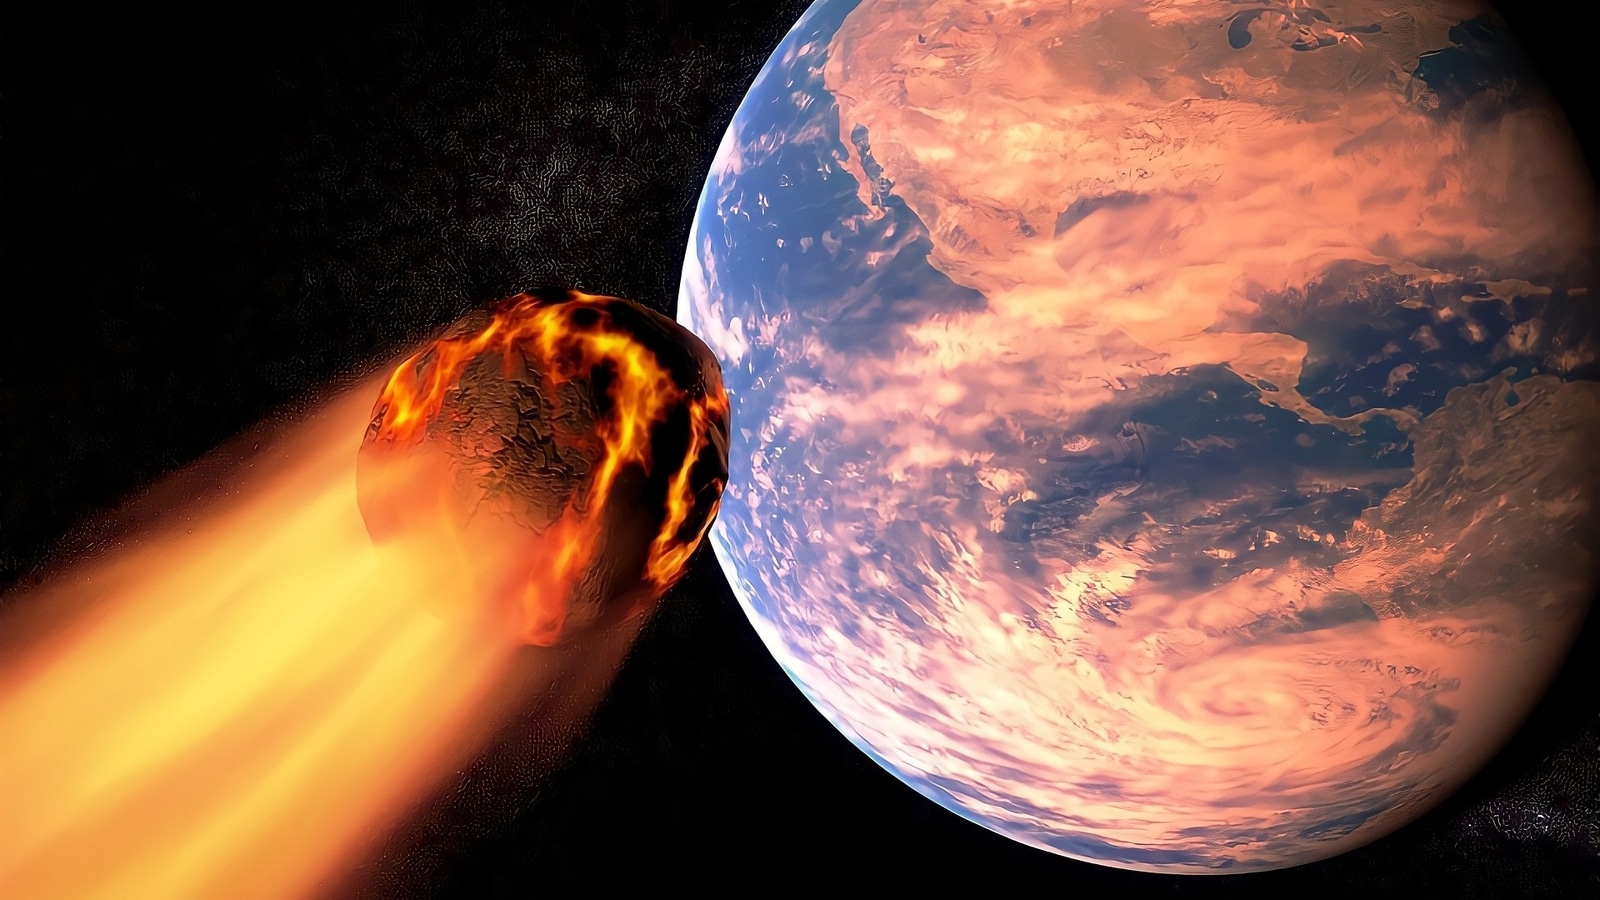 In Pics: Huge asteroid heading for Earth today! NASA issues warning